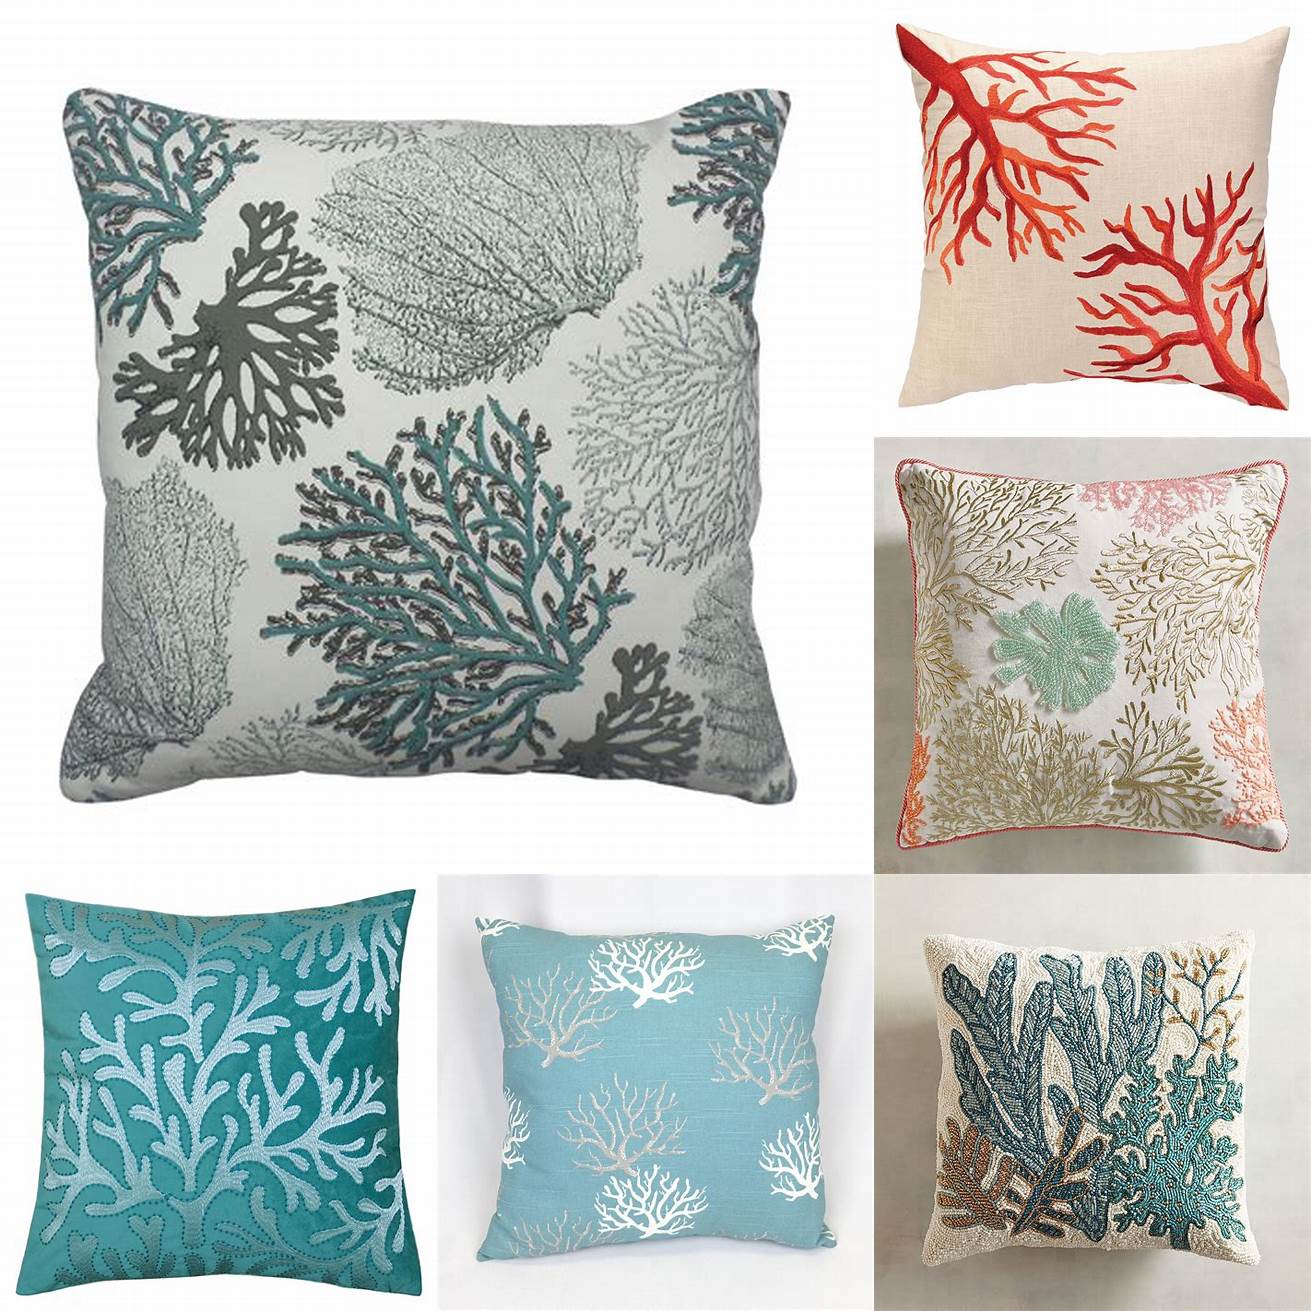 Decorative pillows with coral design